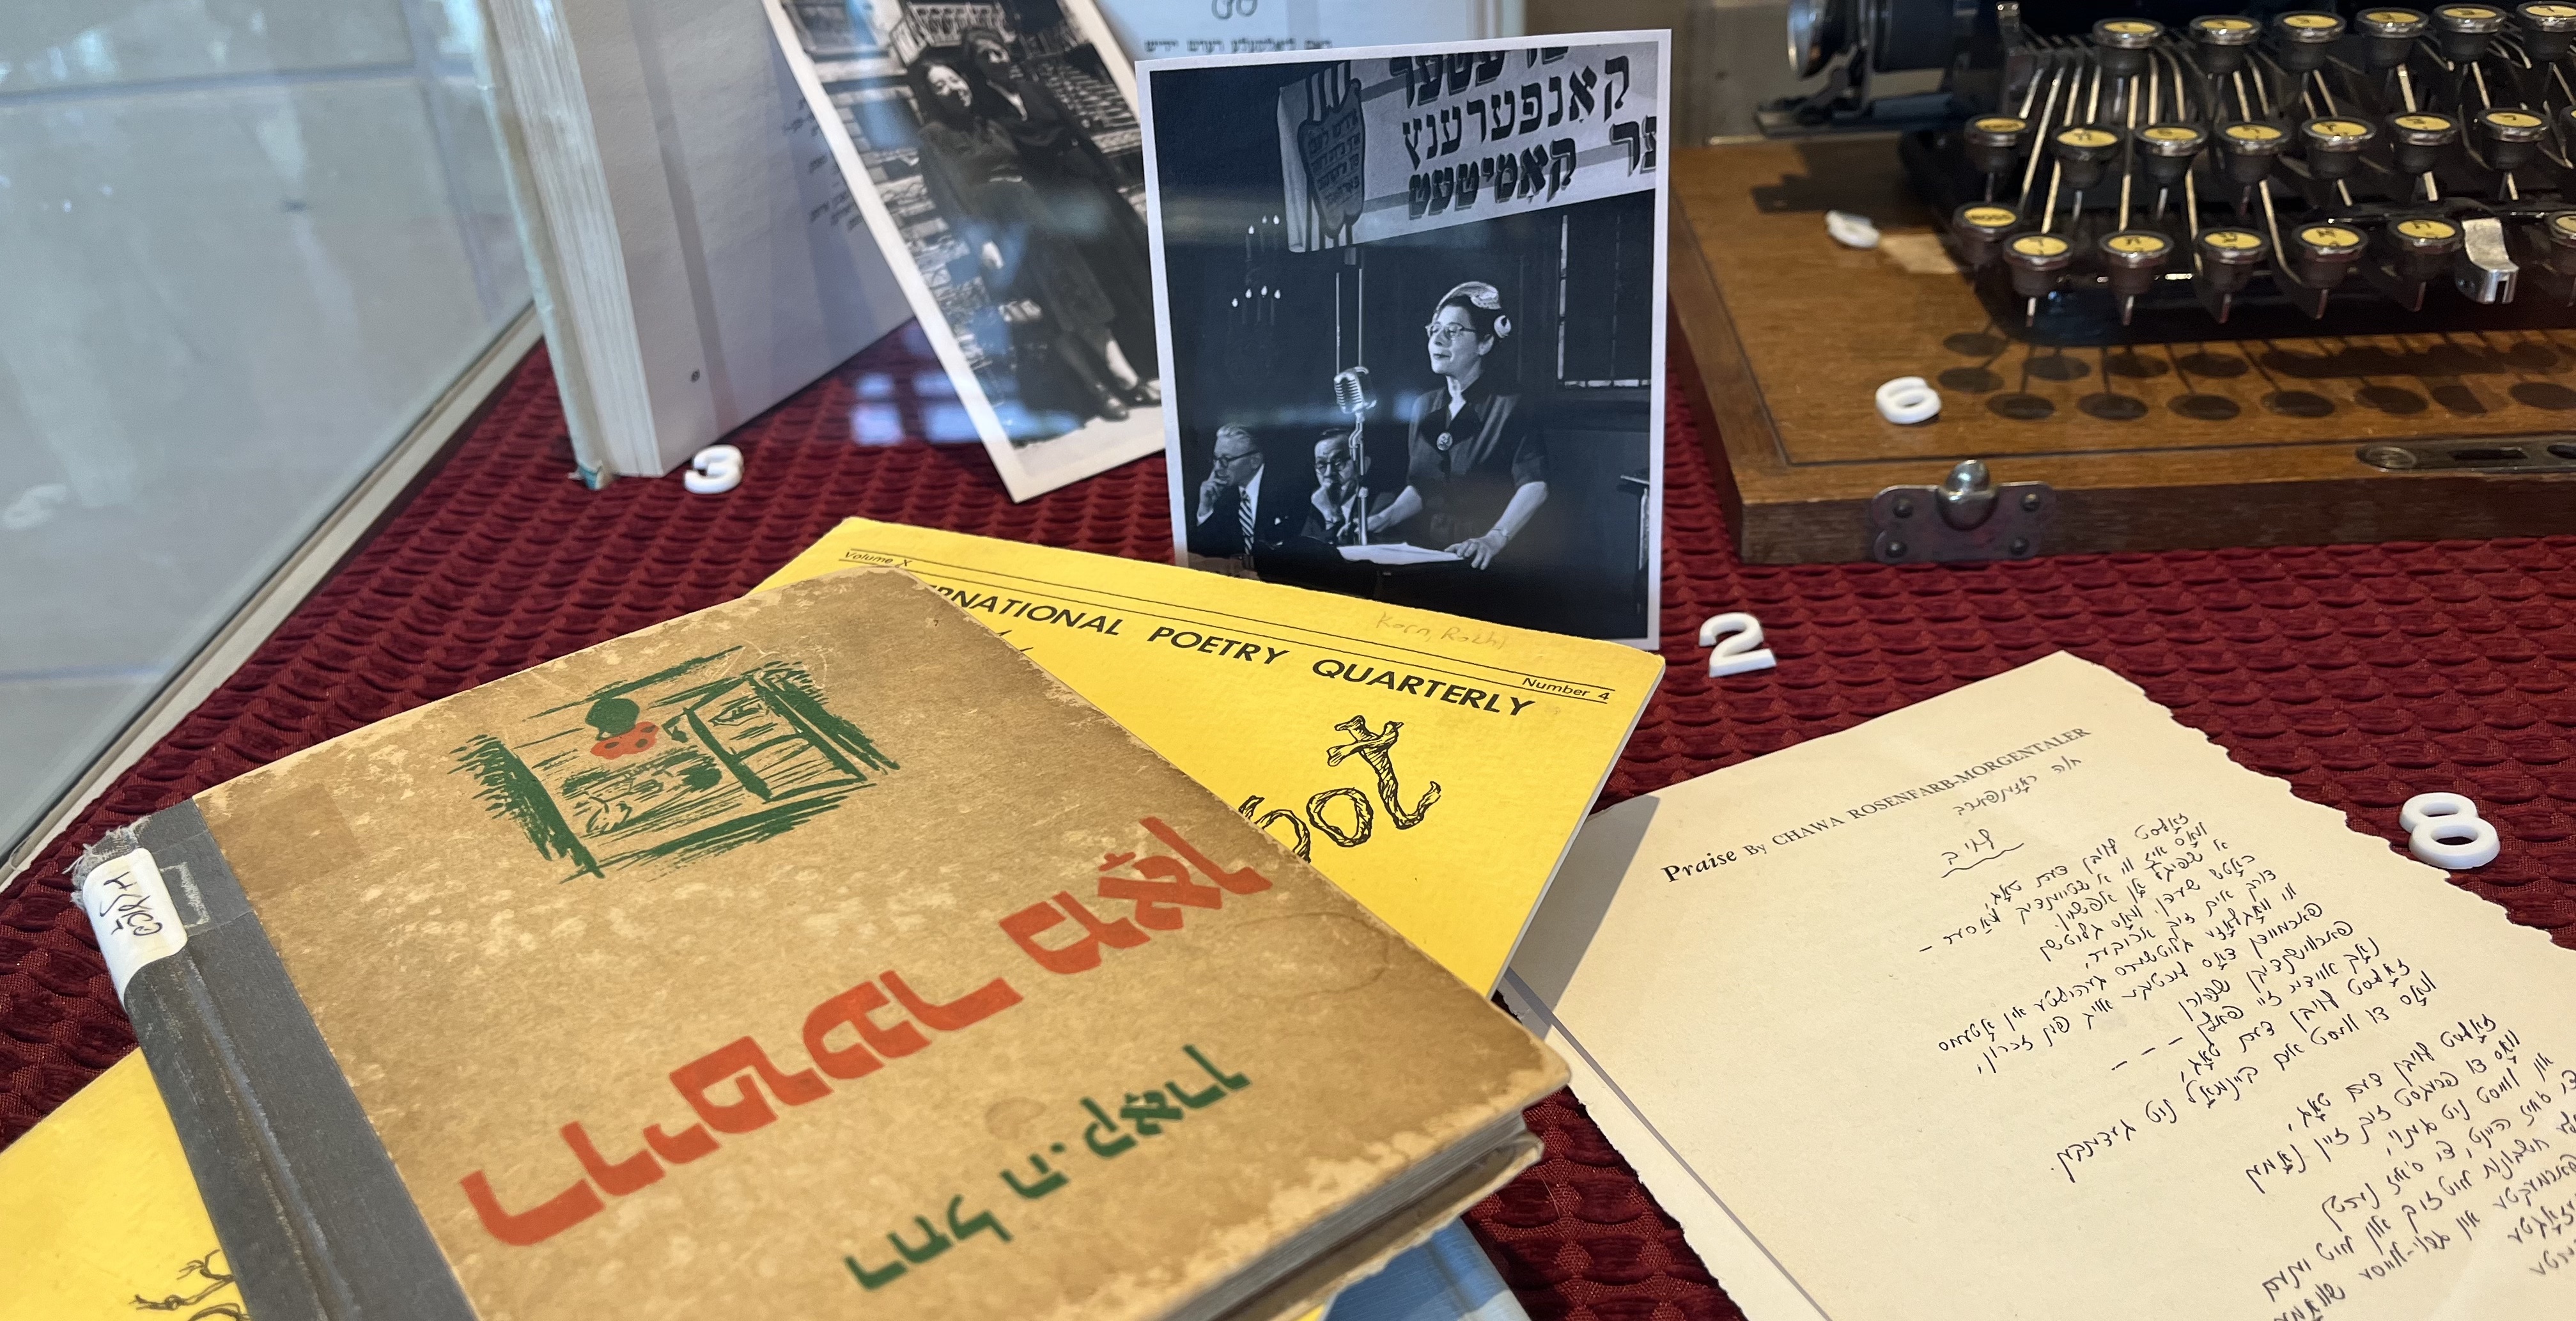 A close-up view of the exhibition case in the main lobby of our building, featuring poetry books, photographs of poets, and an antique Yiddish typewriter.